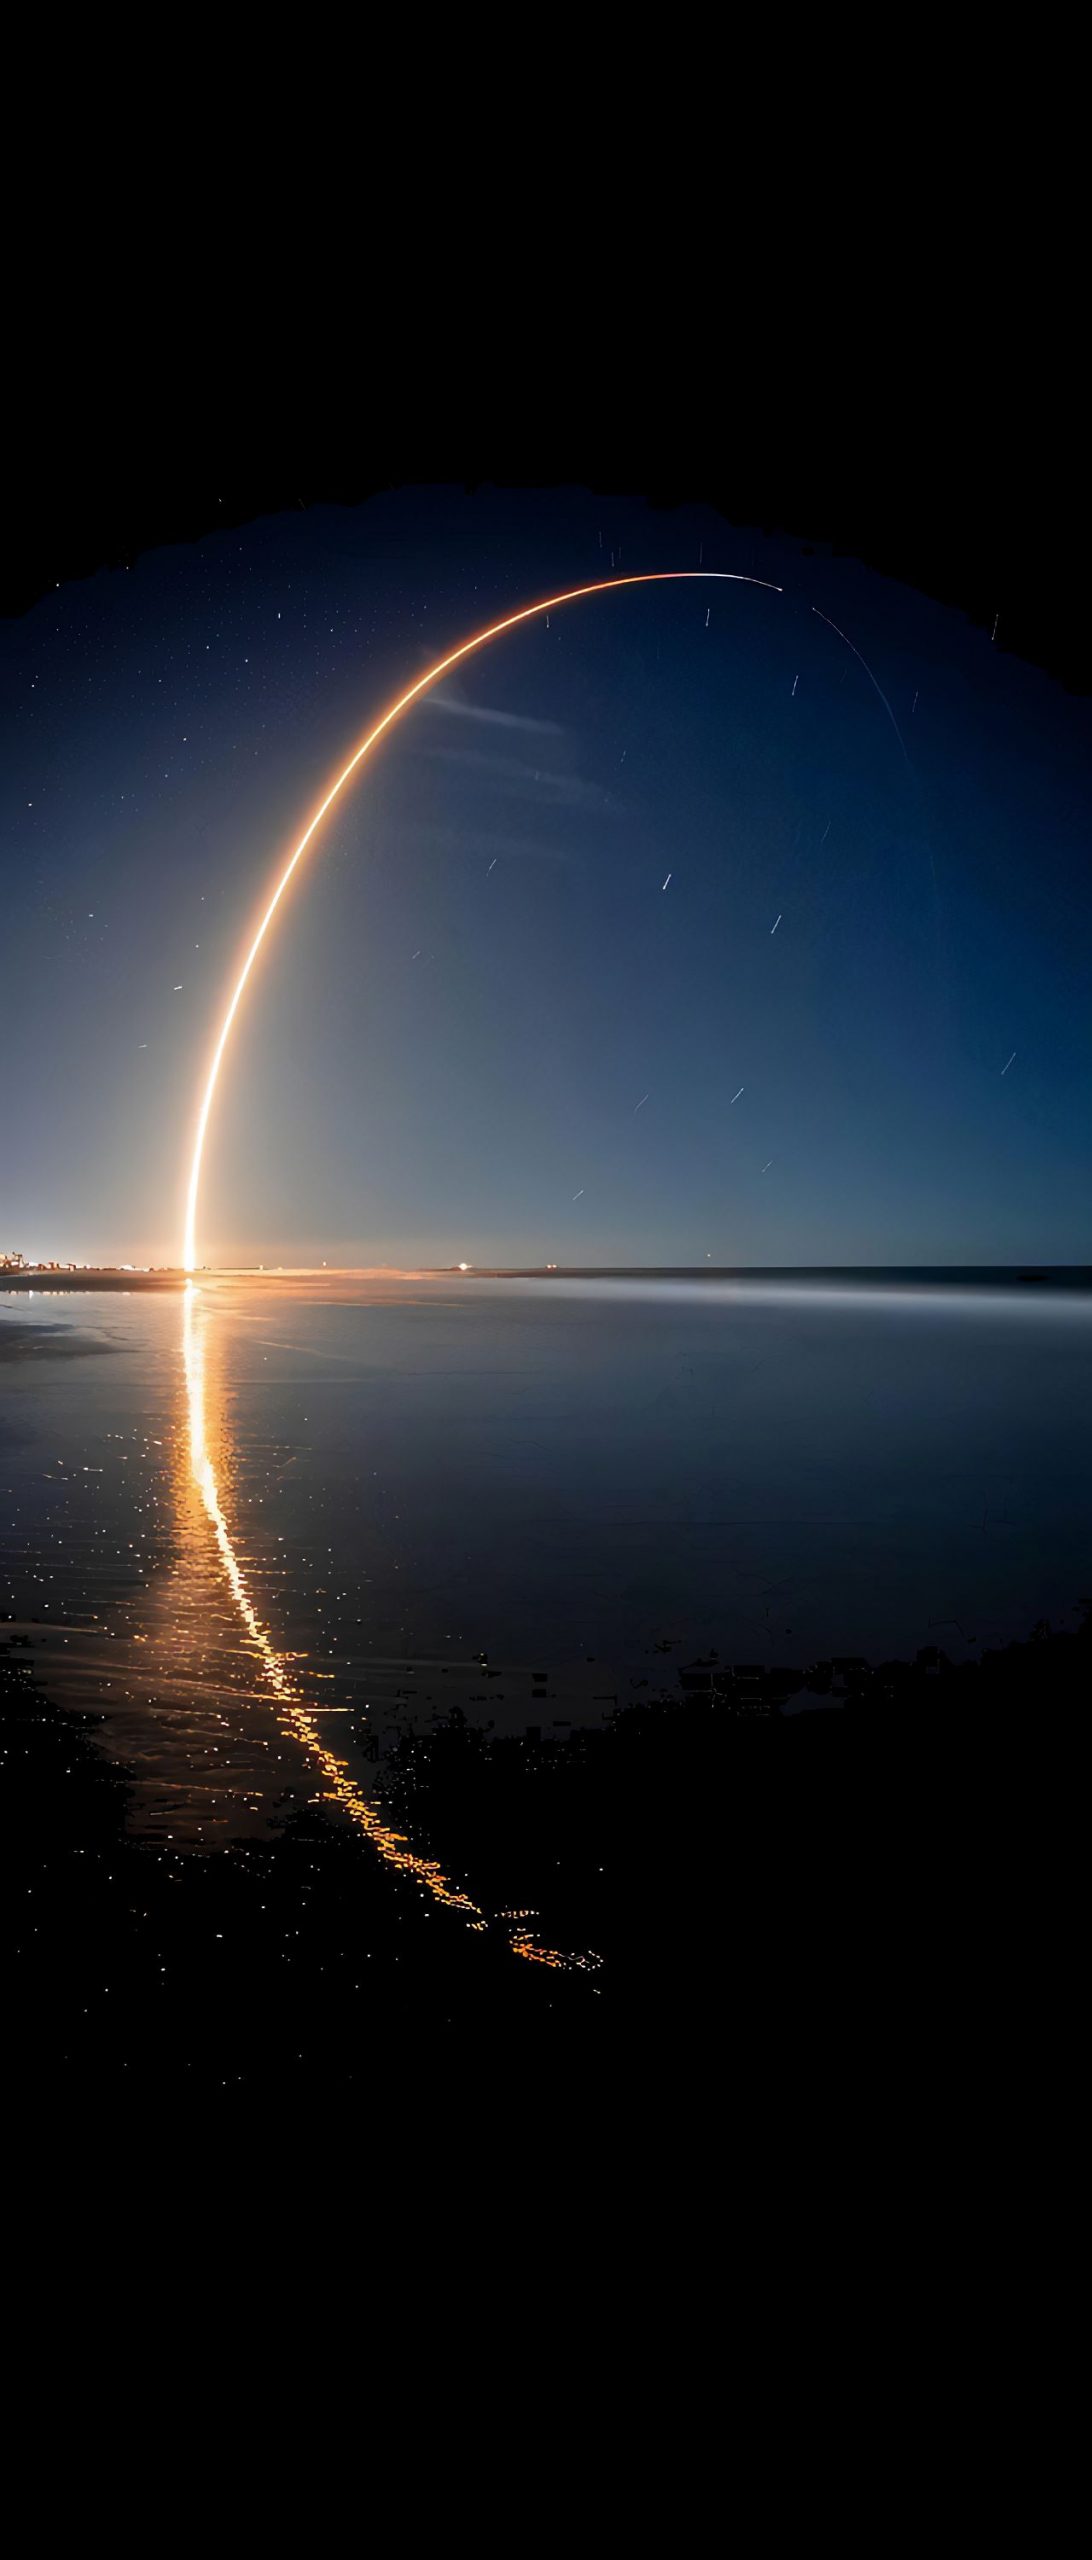 Long exposure photograph of the SpaceX Starlink launch